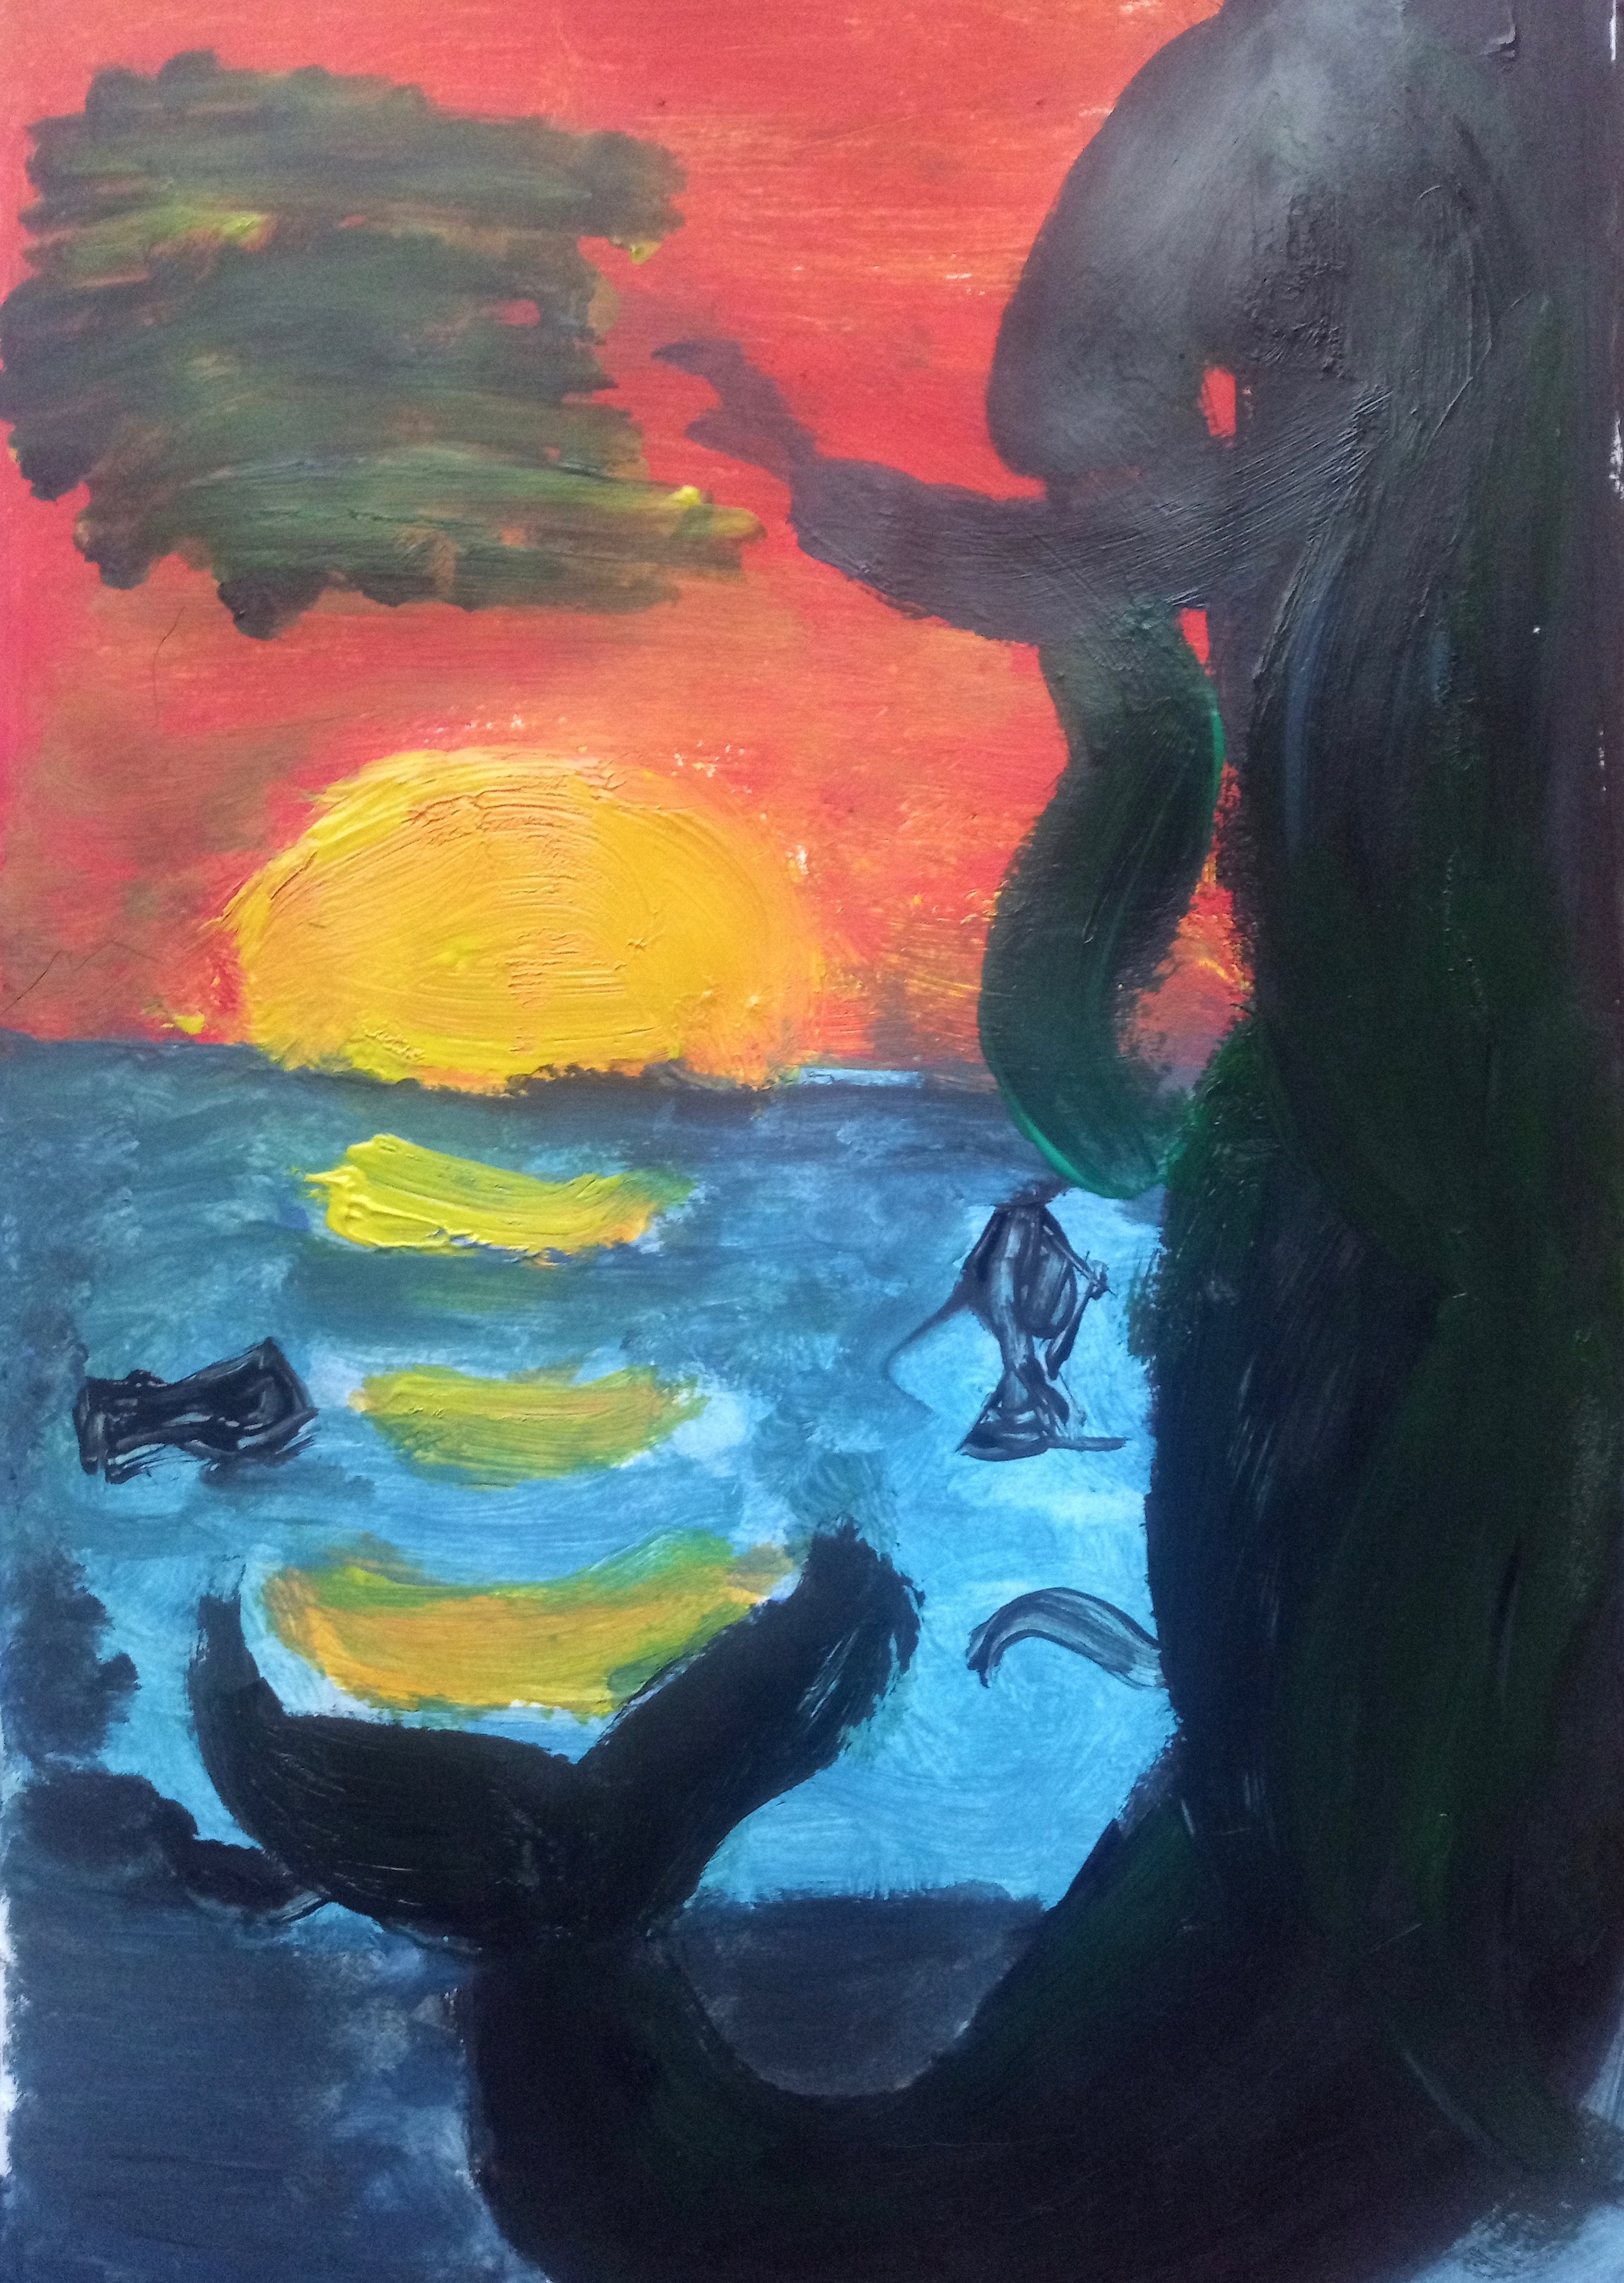 'Mer sunset' by Kai (17) from Laois